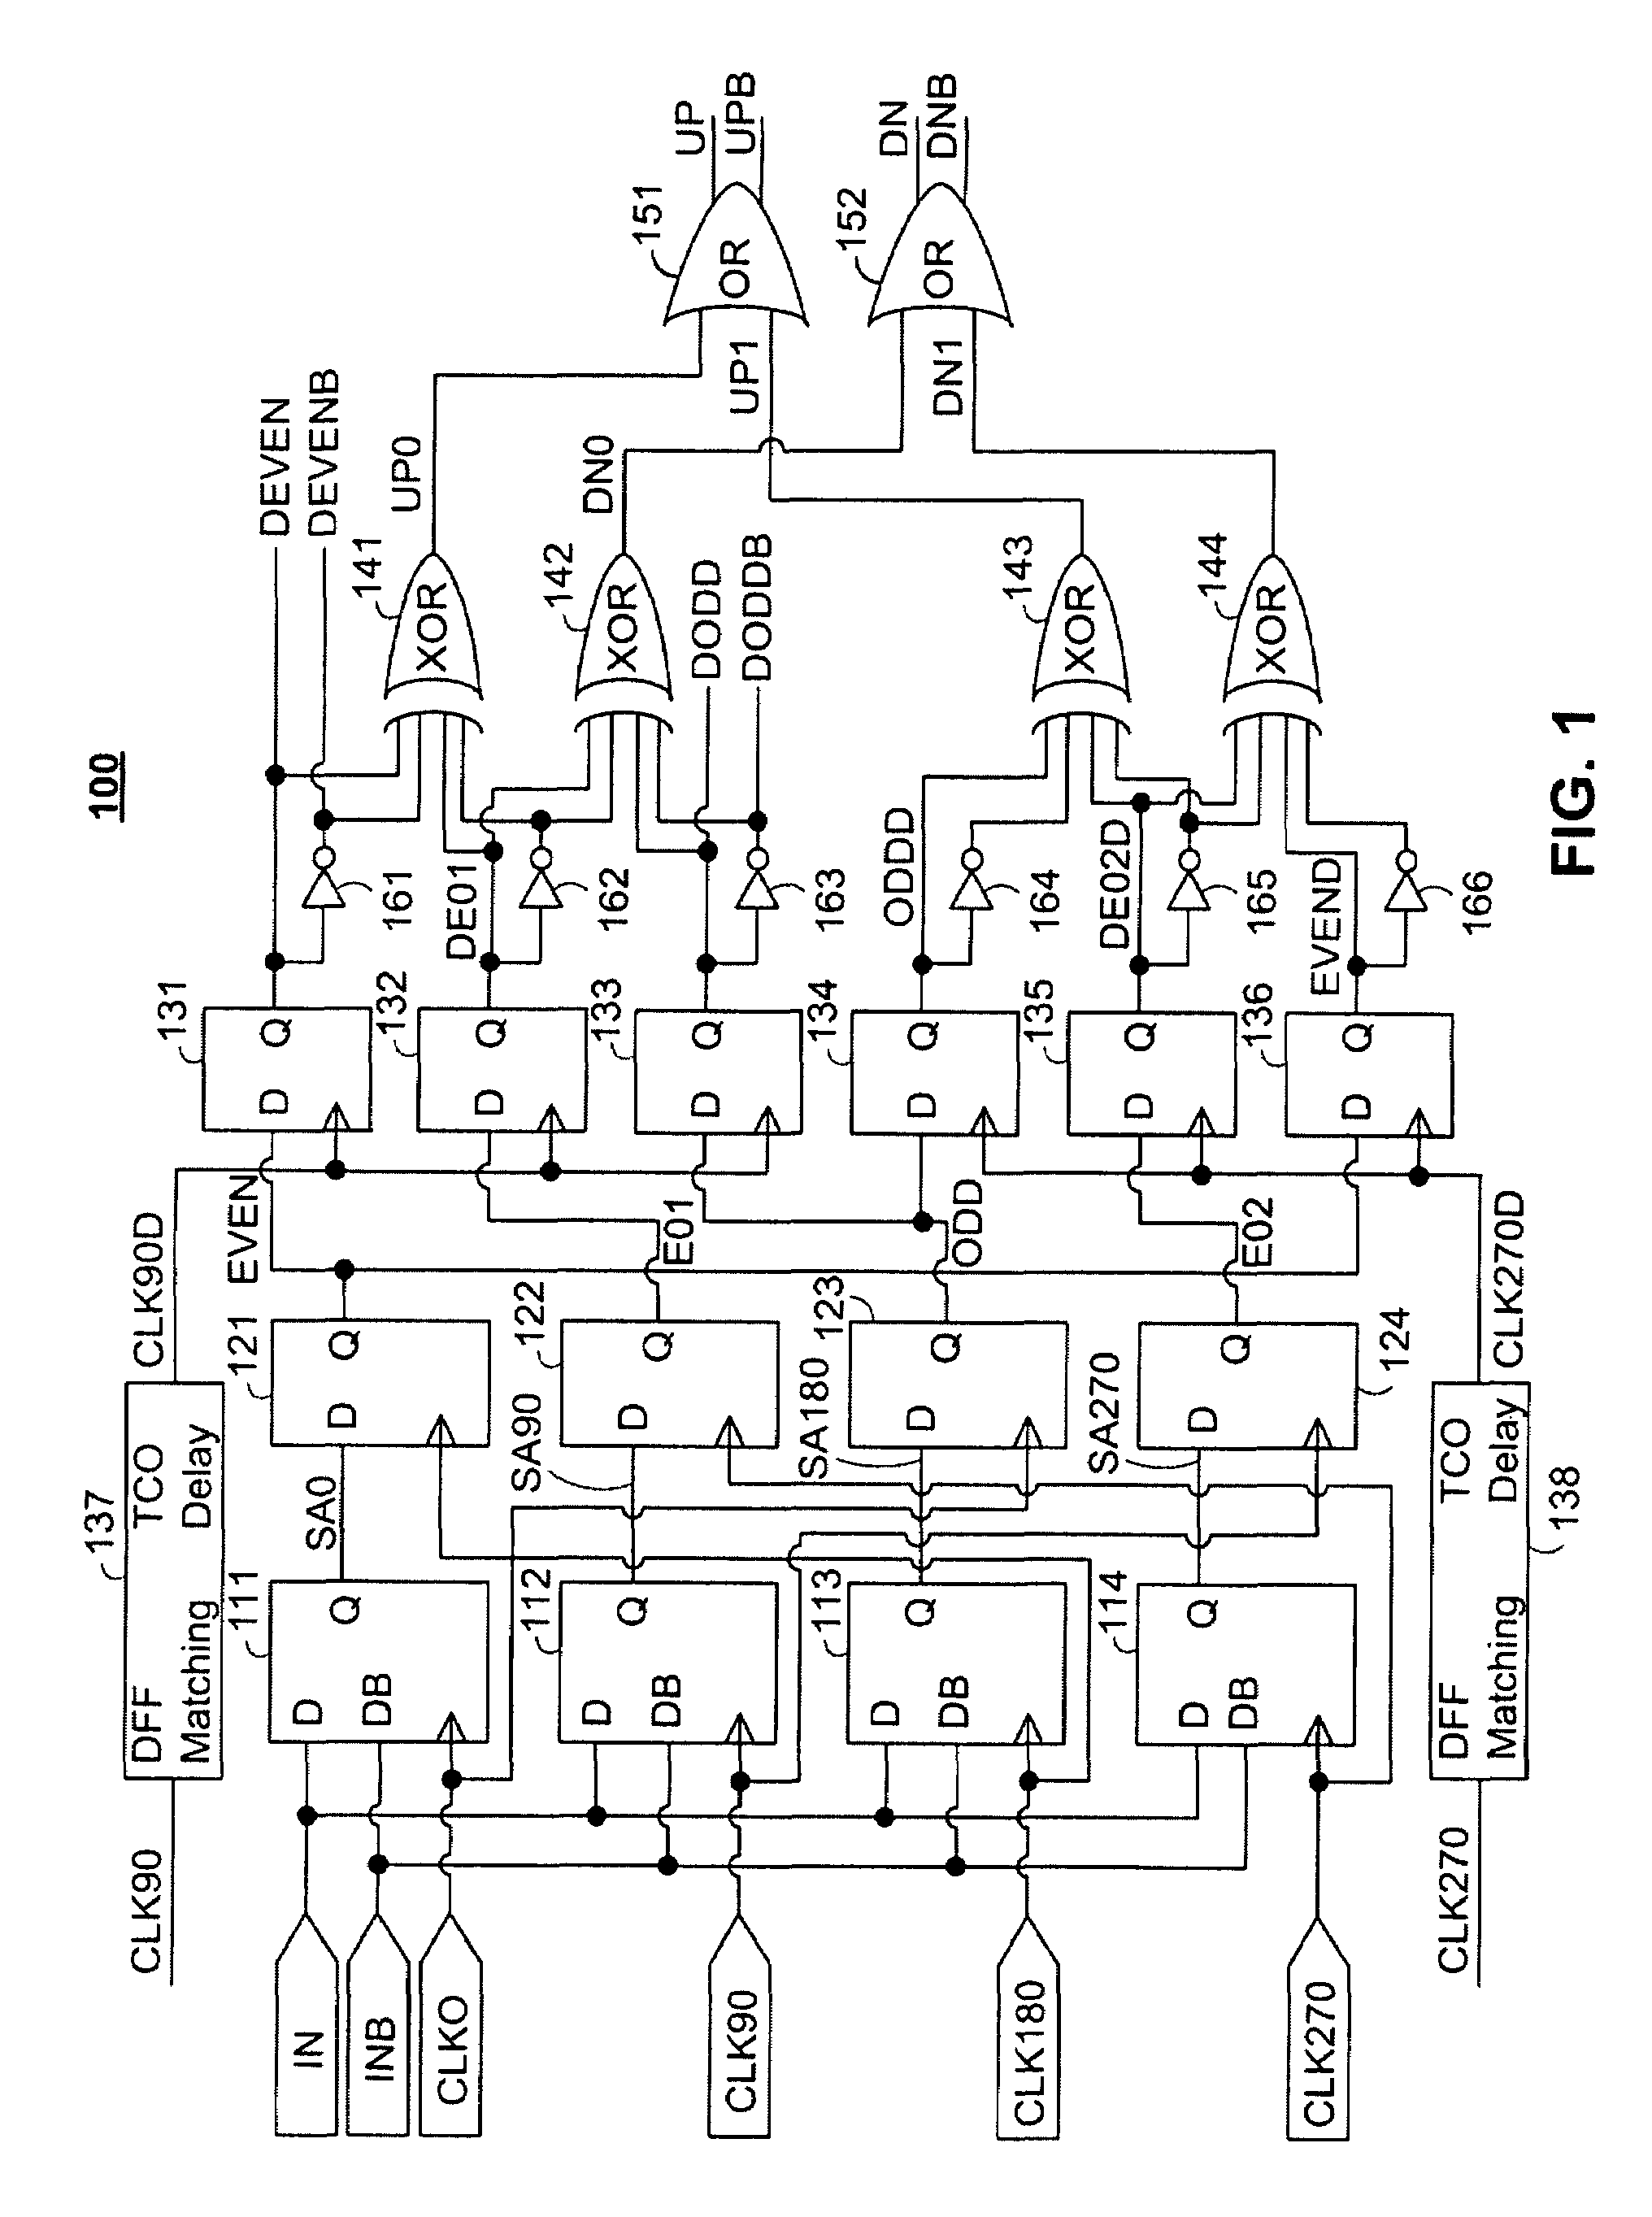 Differential bang-bang phase detector (BBPD) with latency reduction